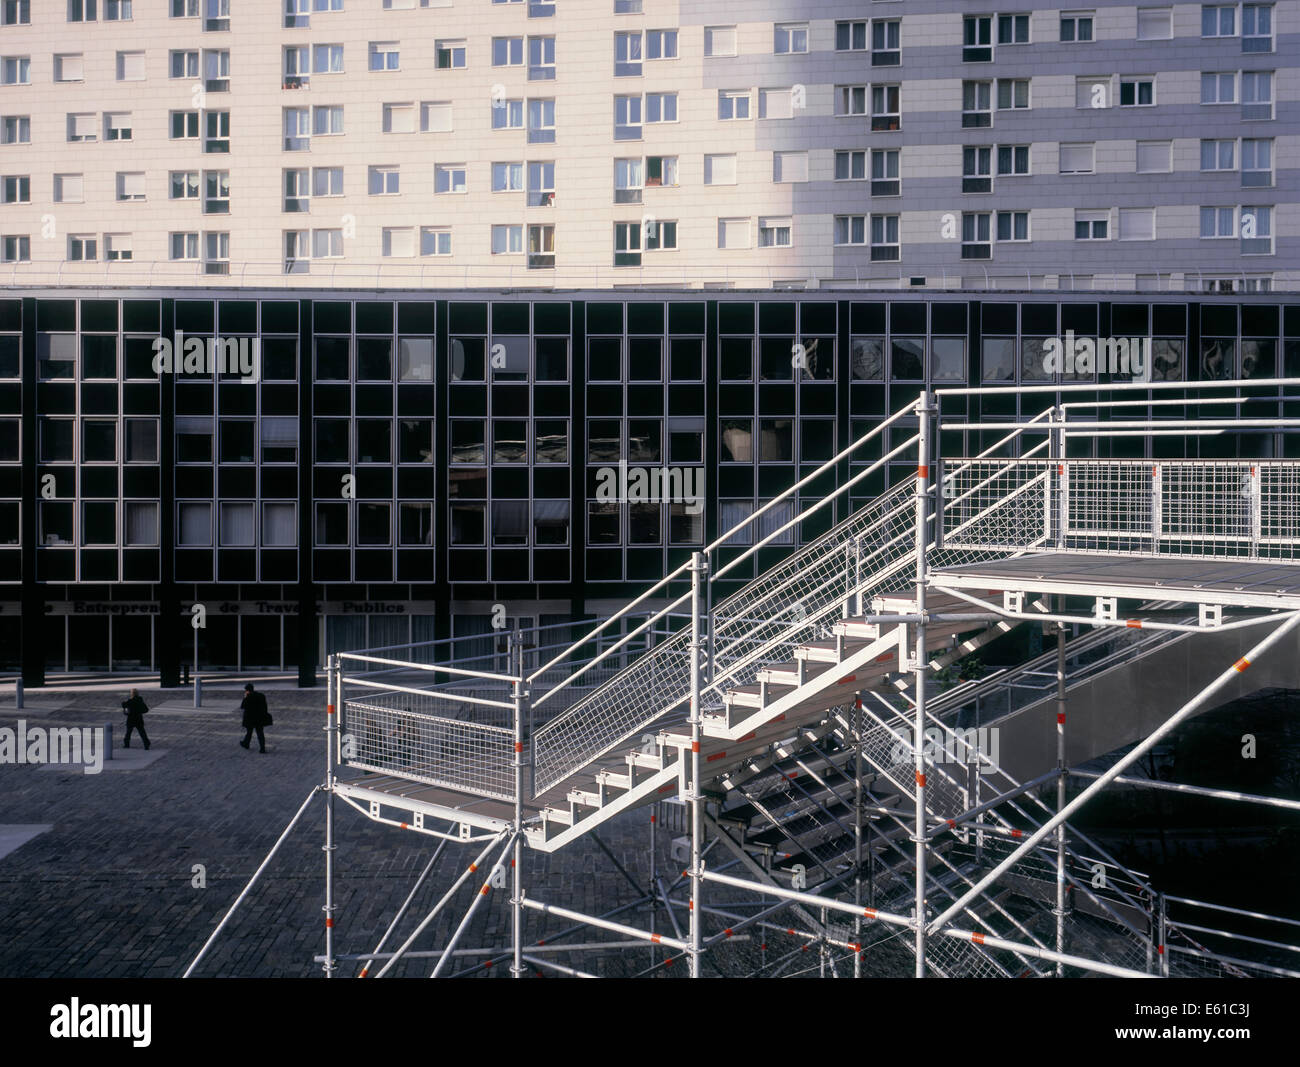 Temporary stairway at rejuvenation project at La Defense, France Stock Photo